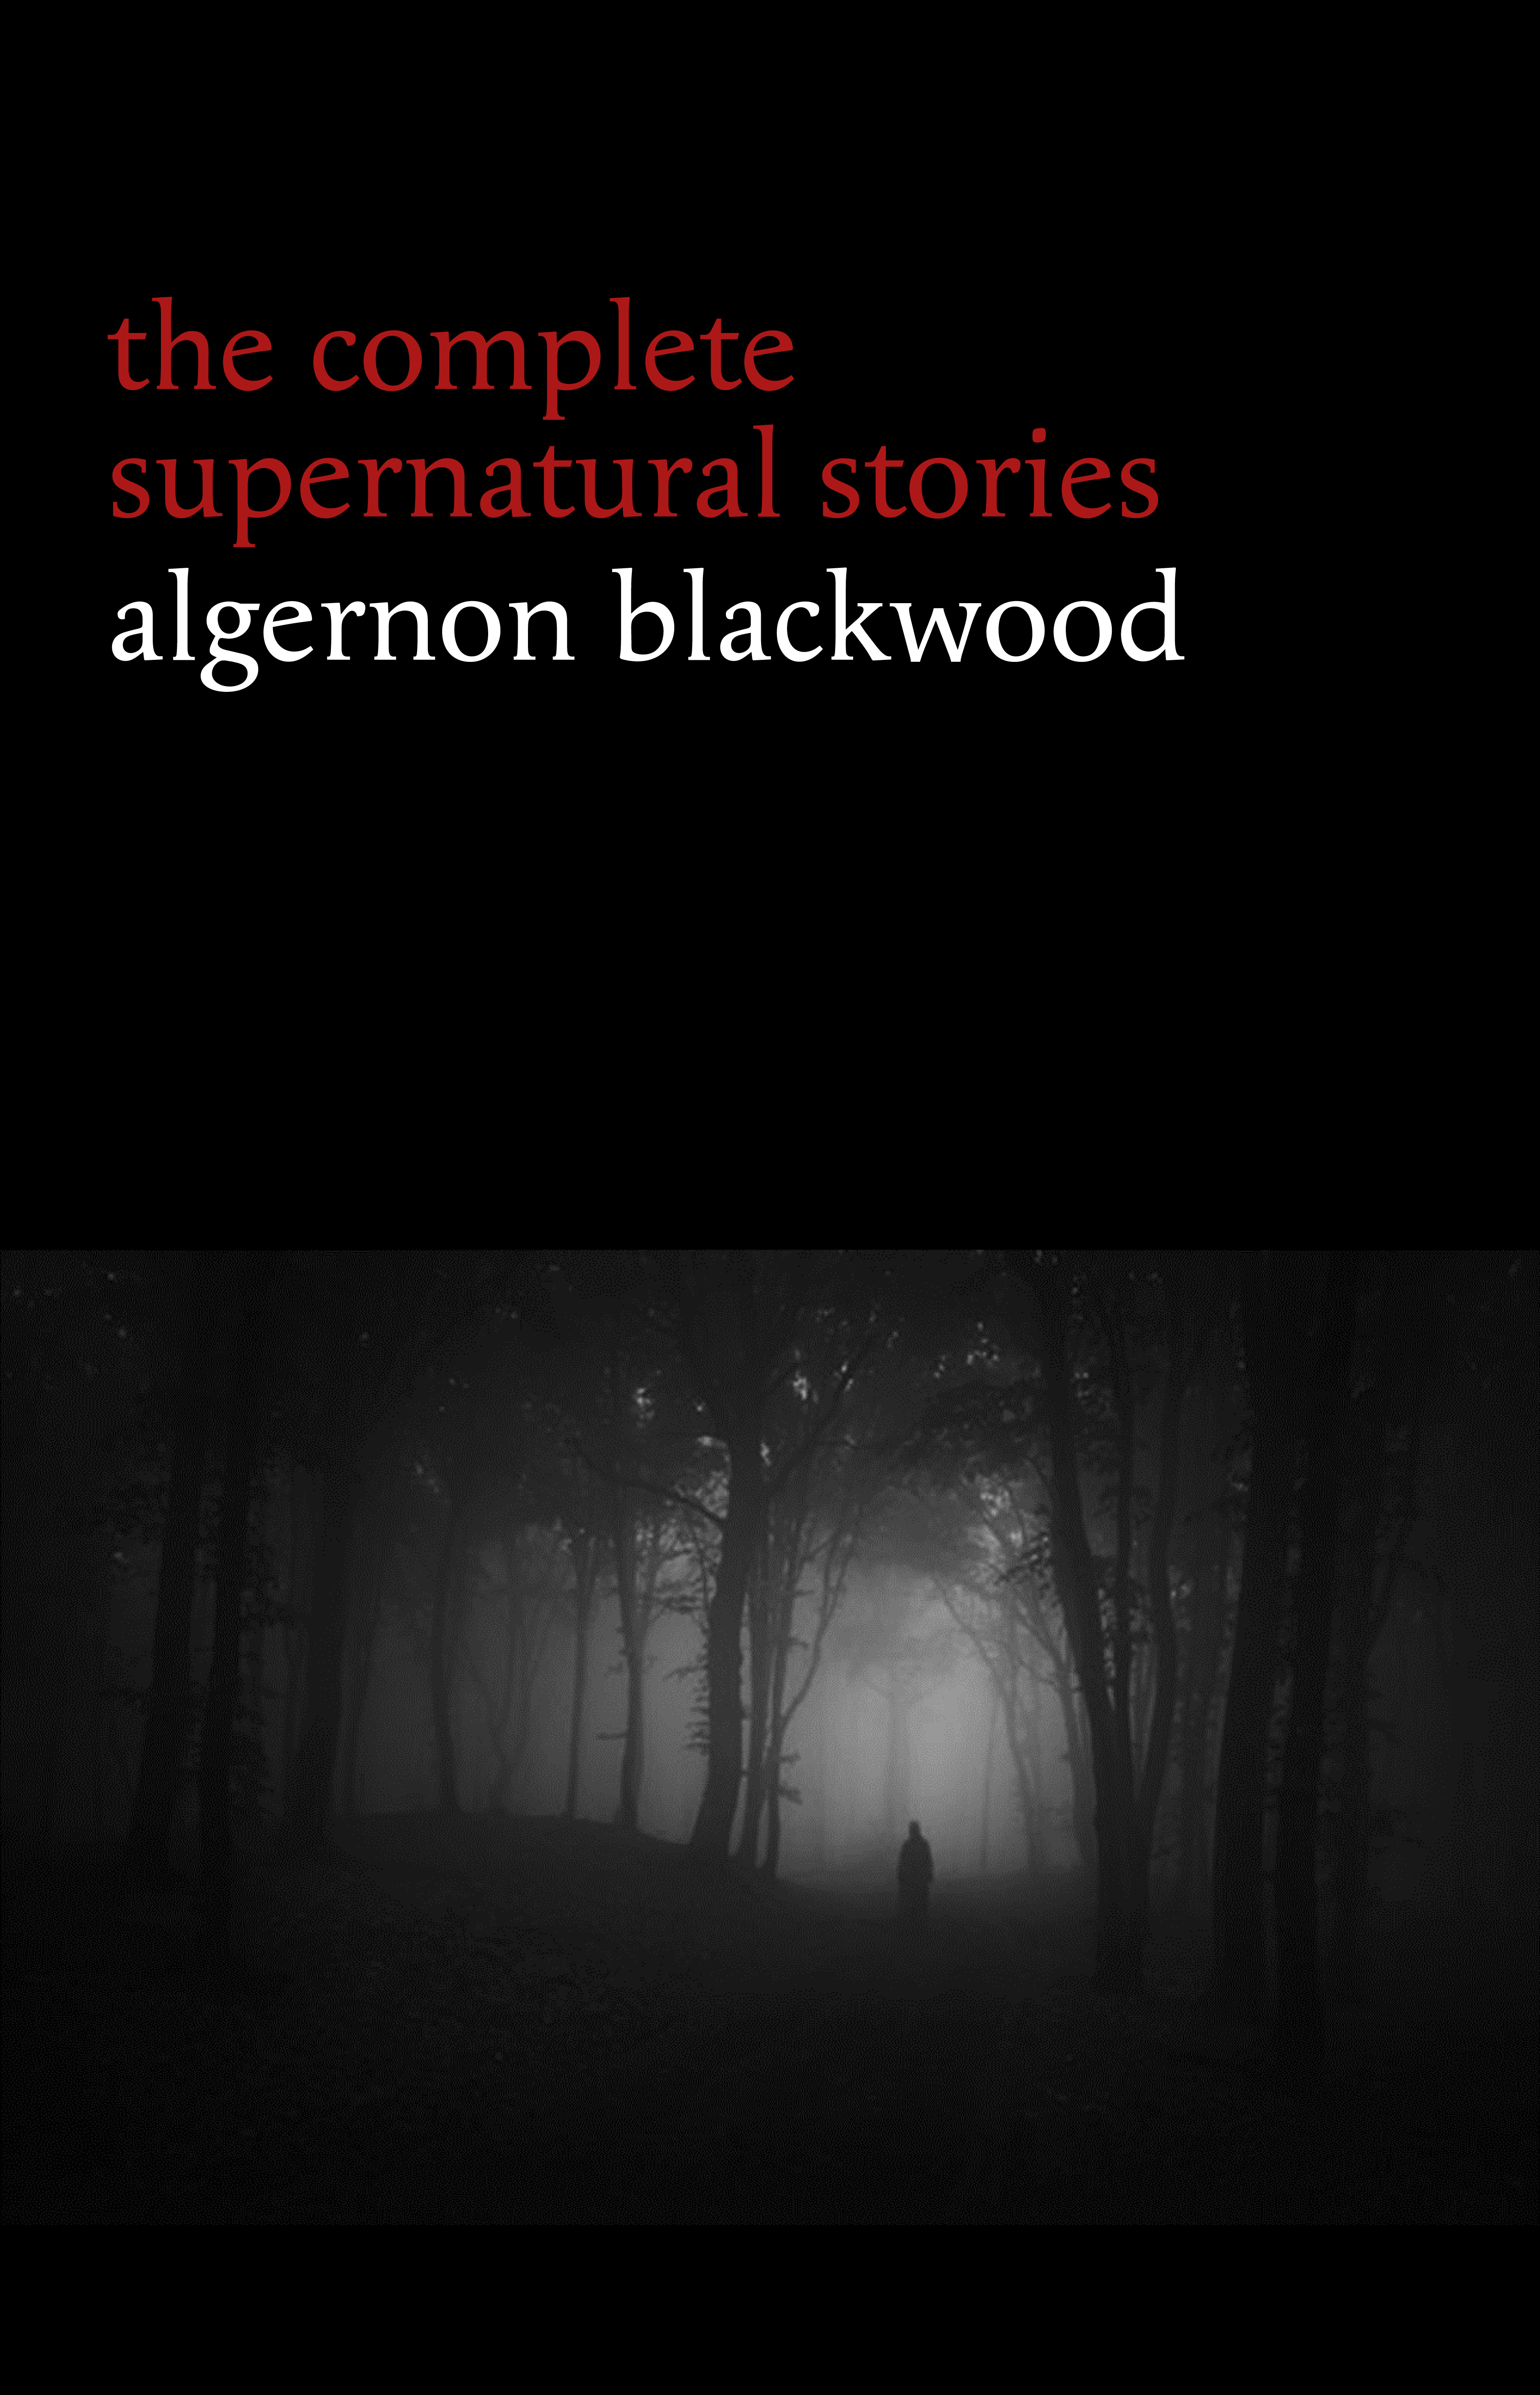 Algernon Blackwood: The Complete Supernatural Stories (120+ tales of ghosts and mystery: The Willows, The Wendigo, The Listener, The Centaur, The Empty House...) (Halloween Stories)